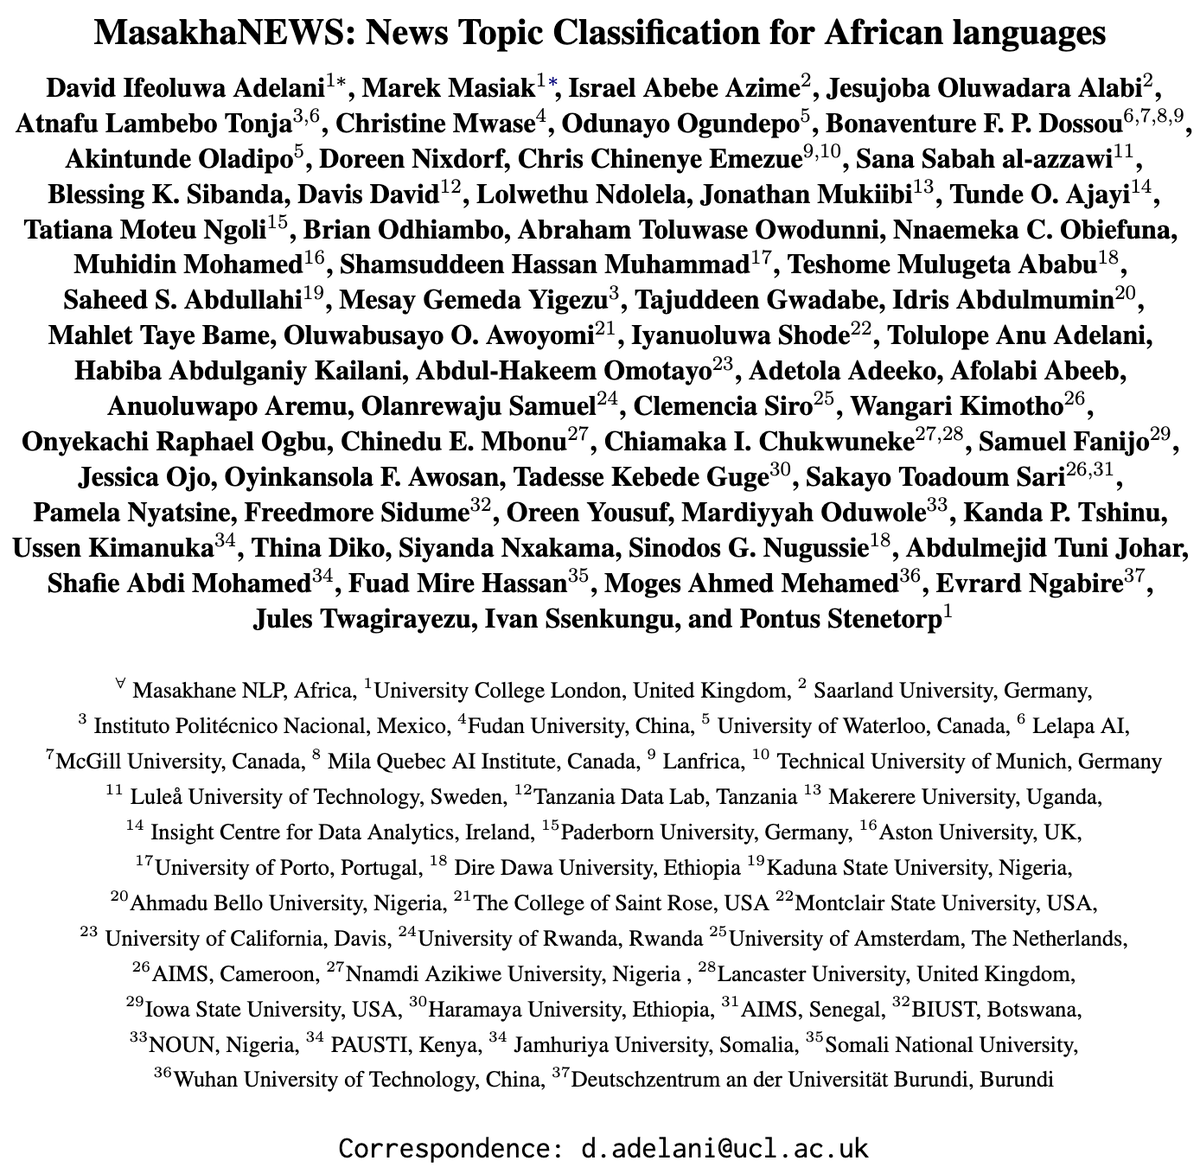 🎉 Big congrats! The 'MasakhaNEWS: News Topic Classification for African languages' paper by David Ifeoluwa Adelani, Marek Masiak et al. wins the Area Chair Award(Resources and Evaluation) at #AACL2023! afnlp.org/conferences/ij…